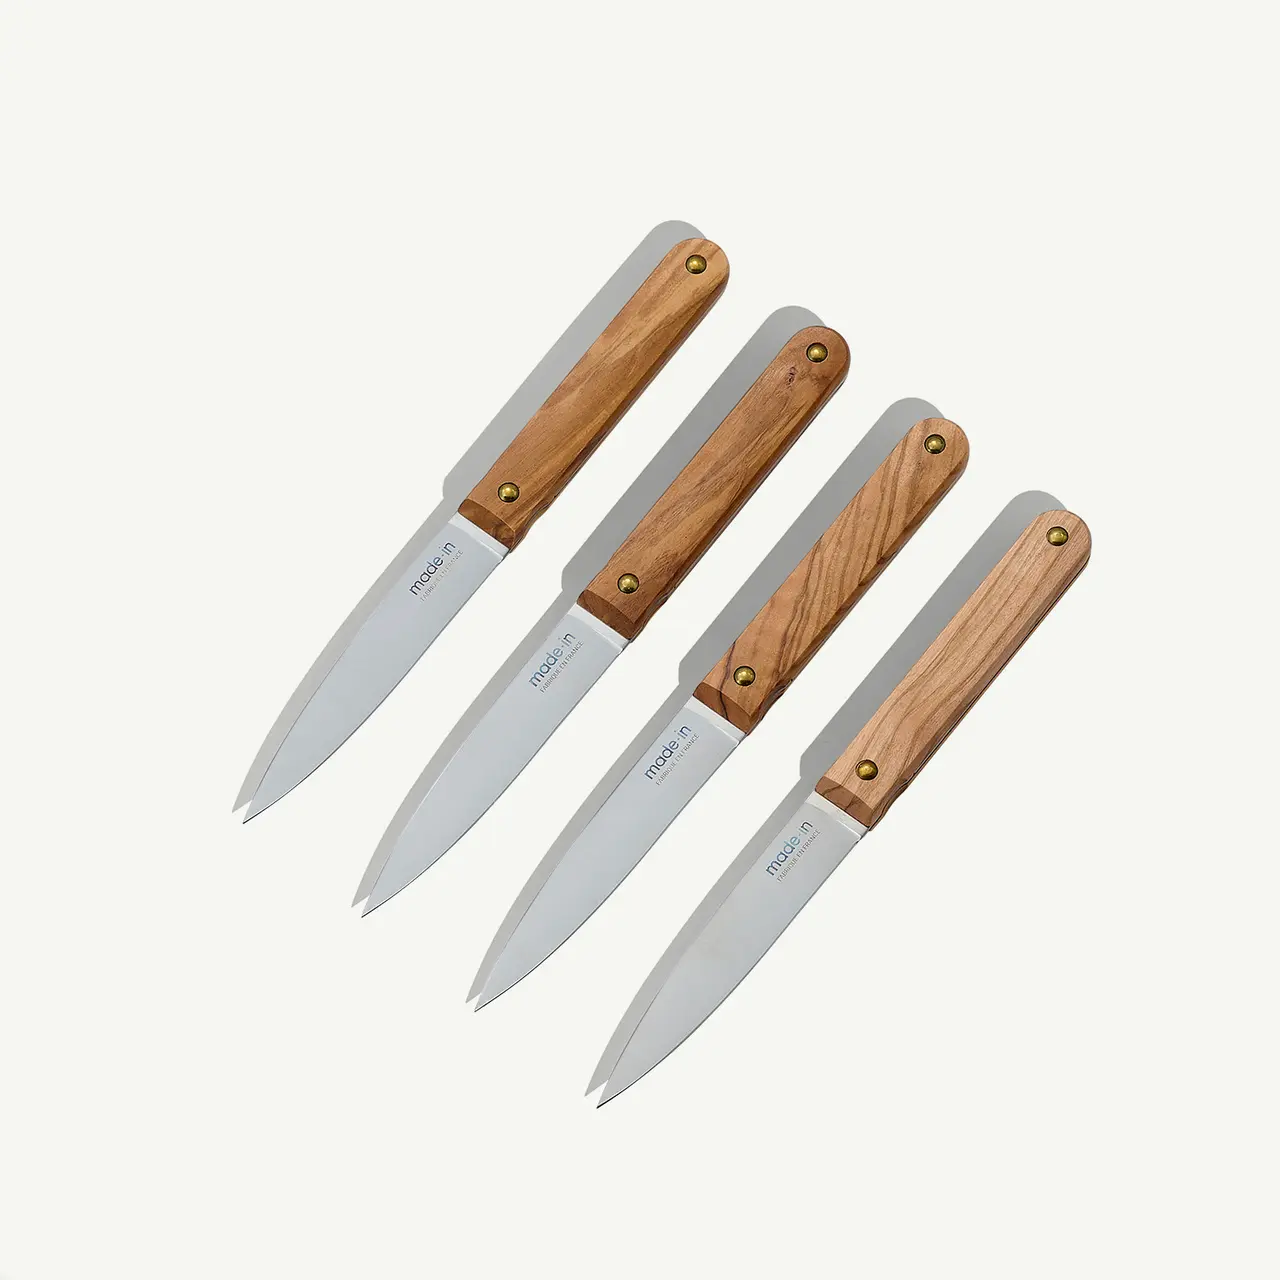 Four wooden-handled kitchen knives are aligned neatly against a light background.